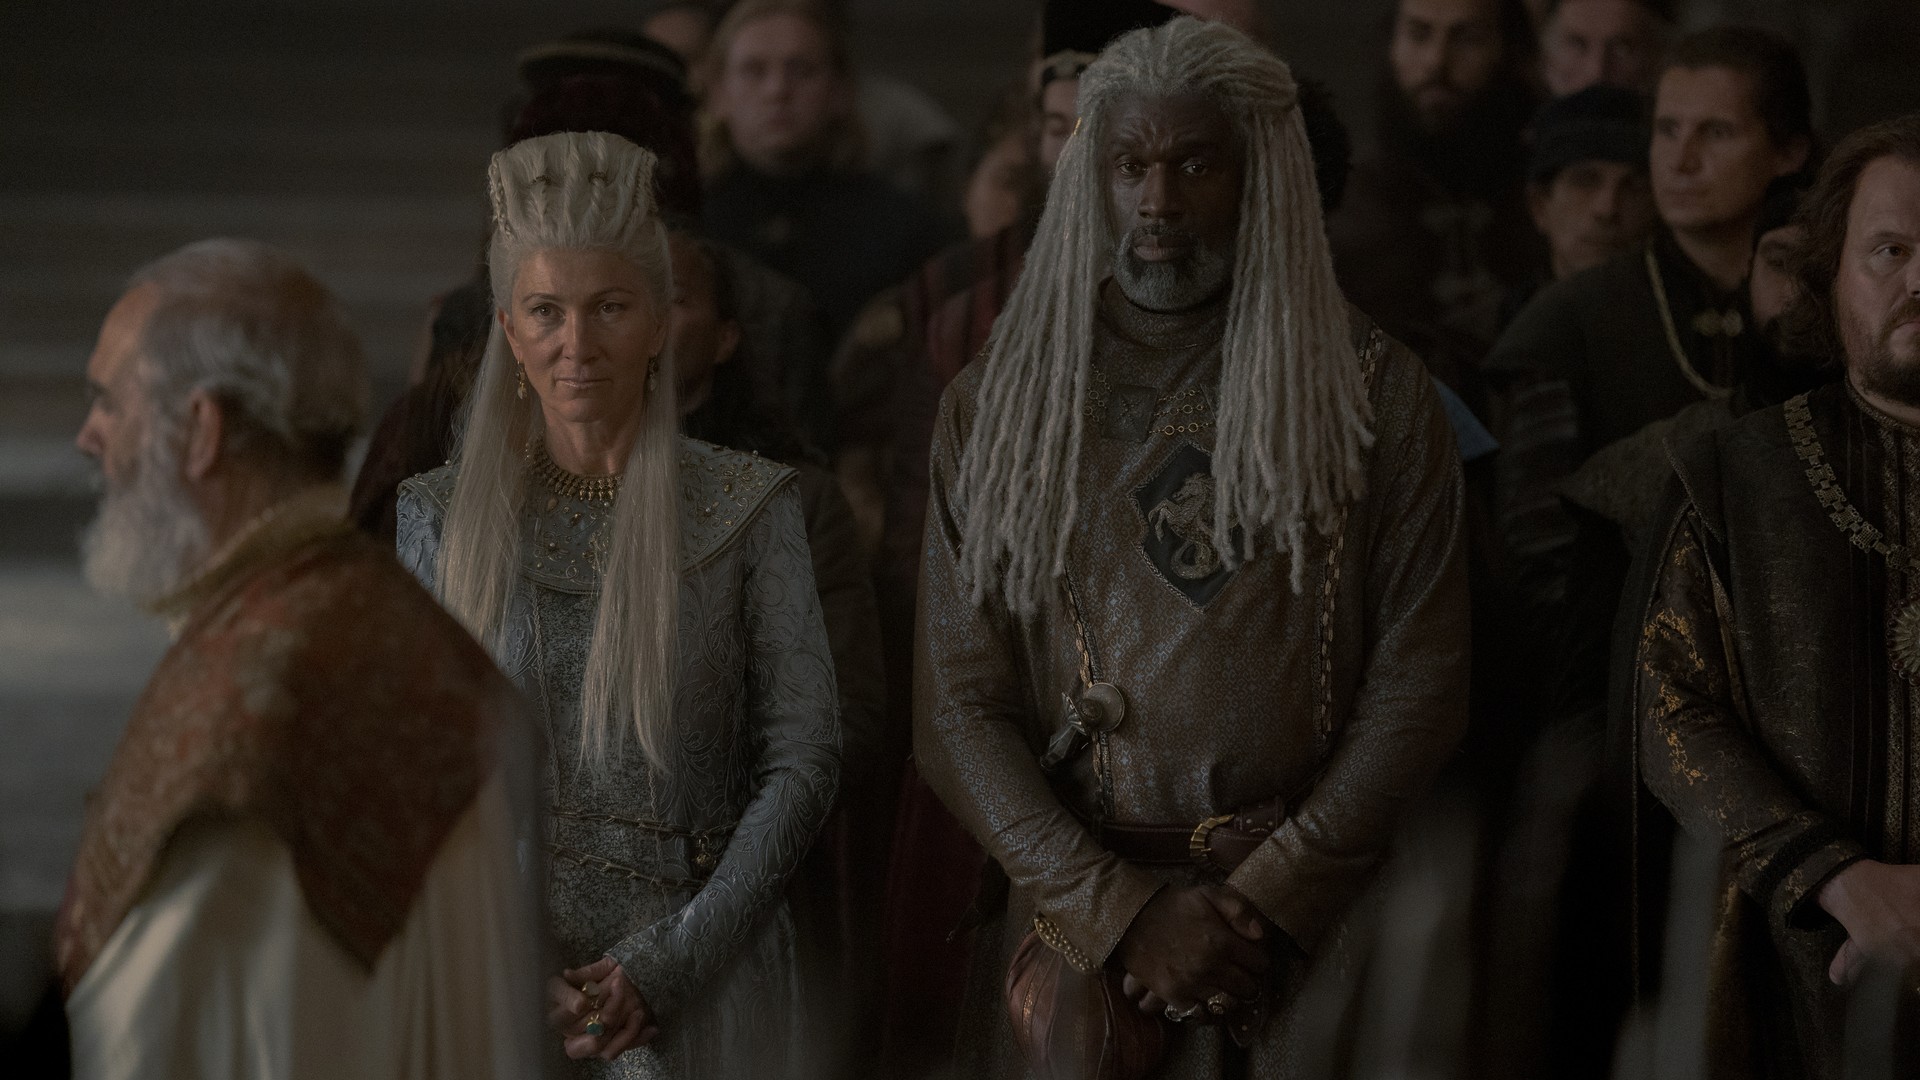 Get to know all 29 House of the Dragon characters, cast members